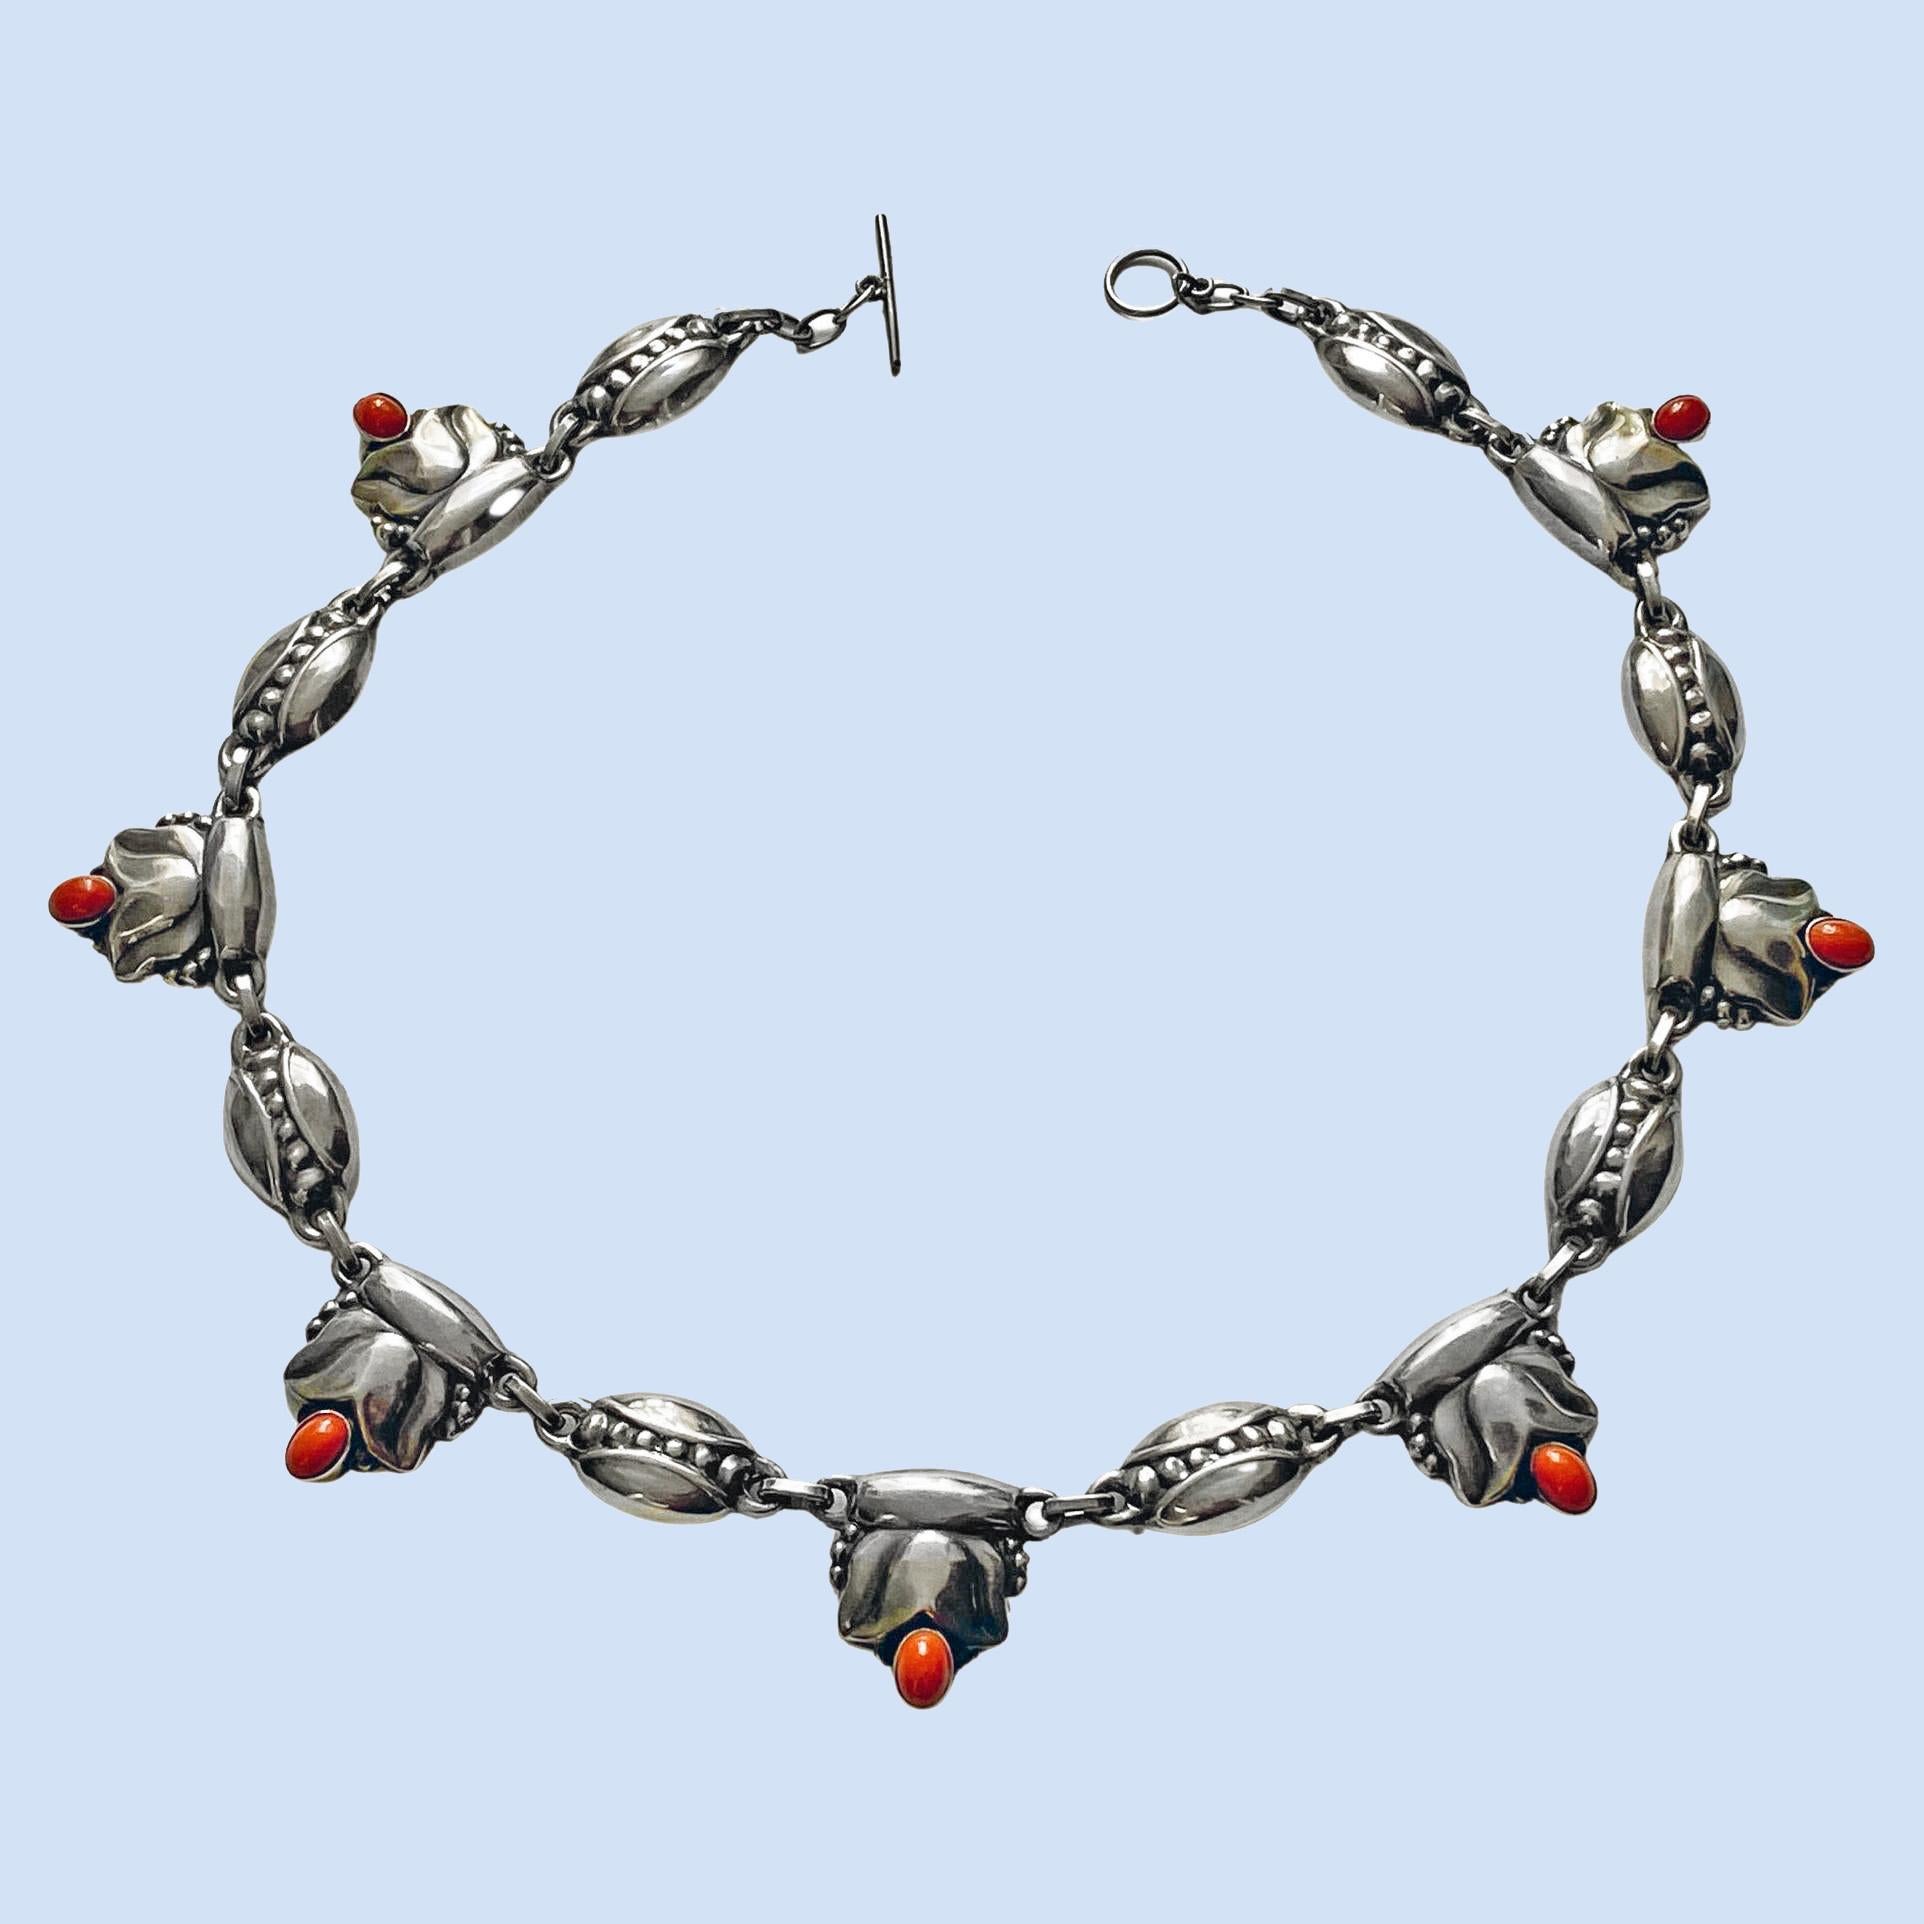 Georg Jensen rare design Sterling Silver and coral color Necklace C.1930, design No. 3. The Necklace composed of leaf and bud motifs. Length: 18.125 inches. Item Weight: 44.94 grams. Marks for Georg Jensen, GJ, 925 Sterling Denmark, 3. Similar